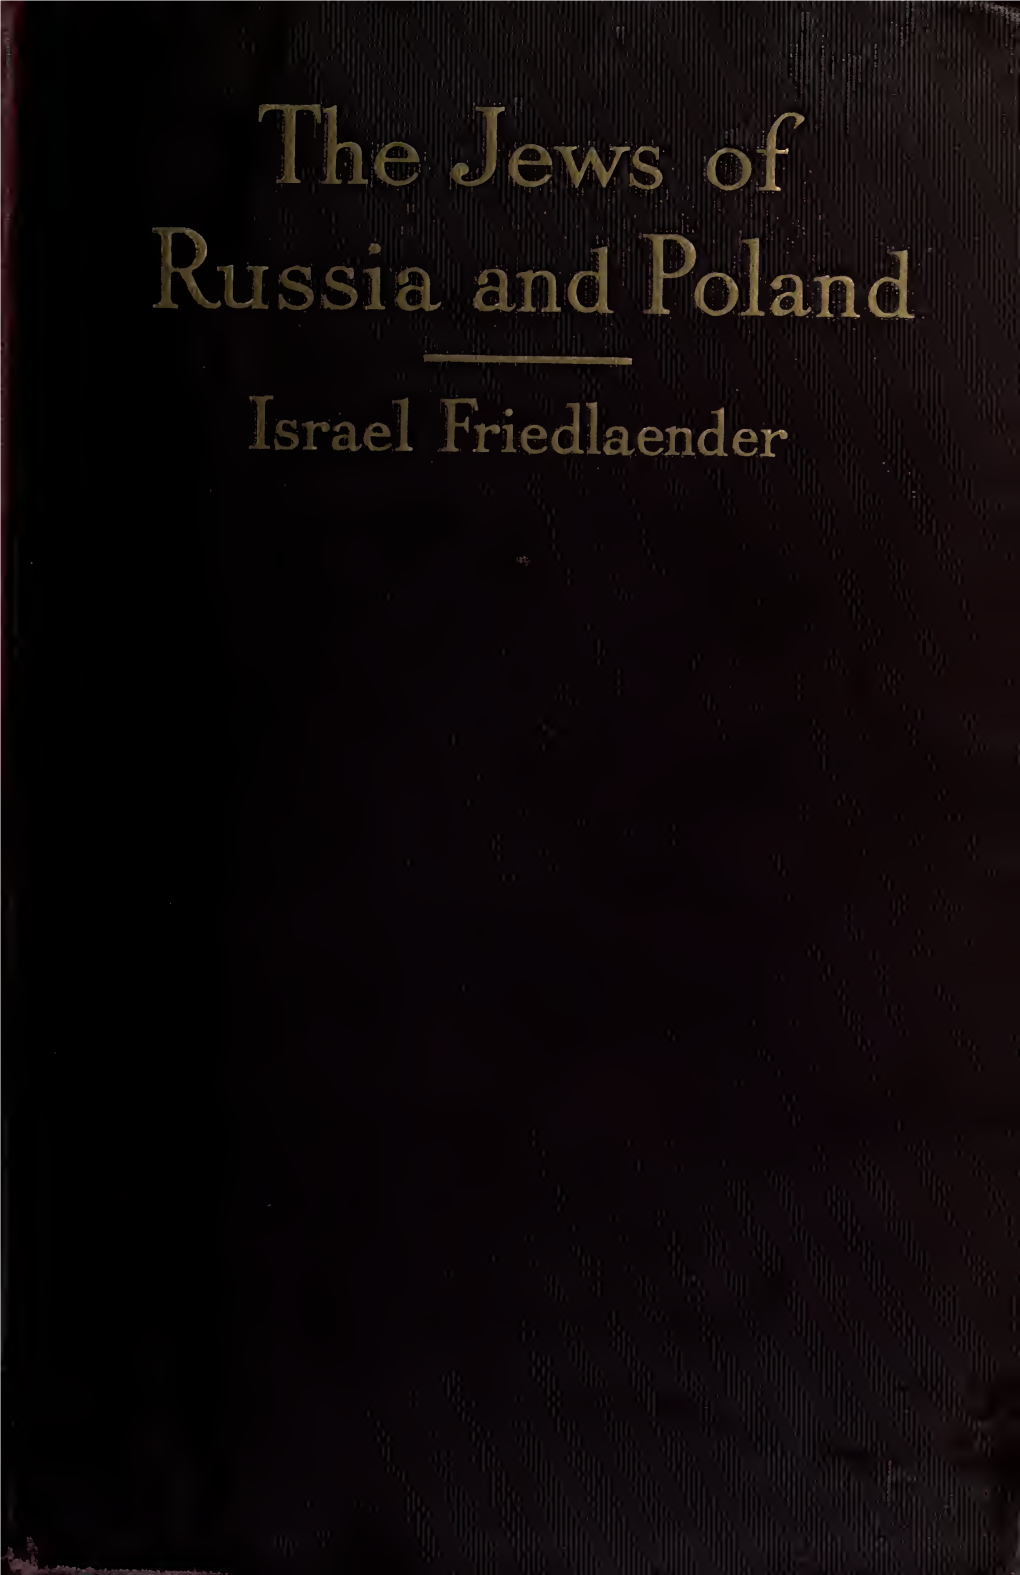 The Jews of Russia and Poland